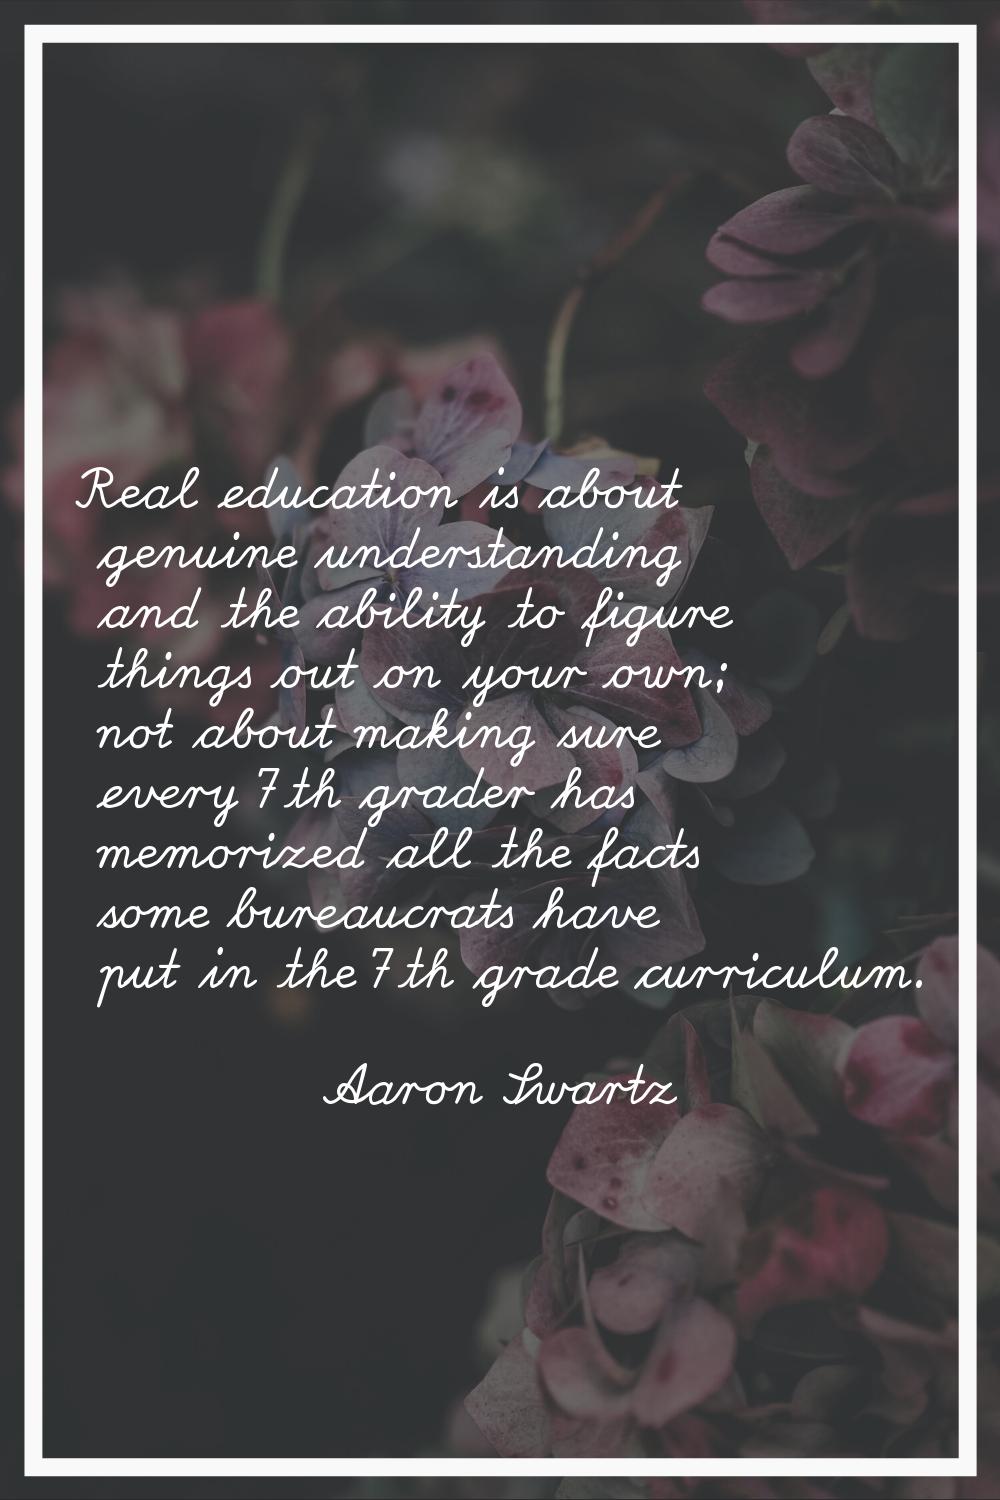 Real education is about genuine understanding and the ability to figure things out on your own; not